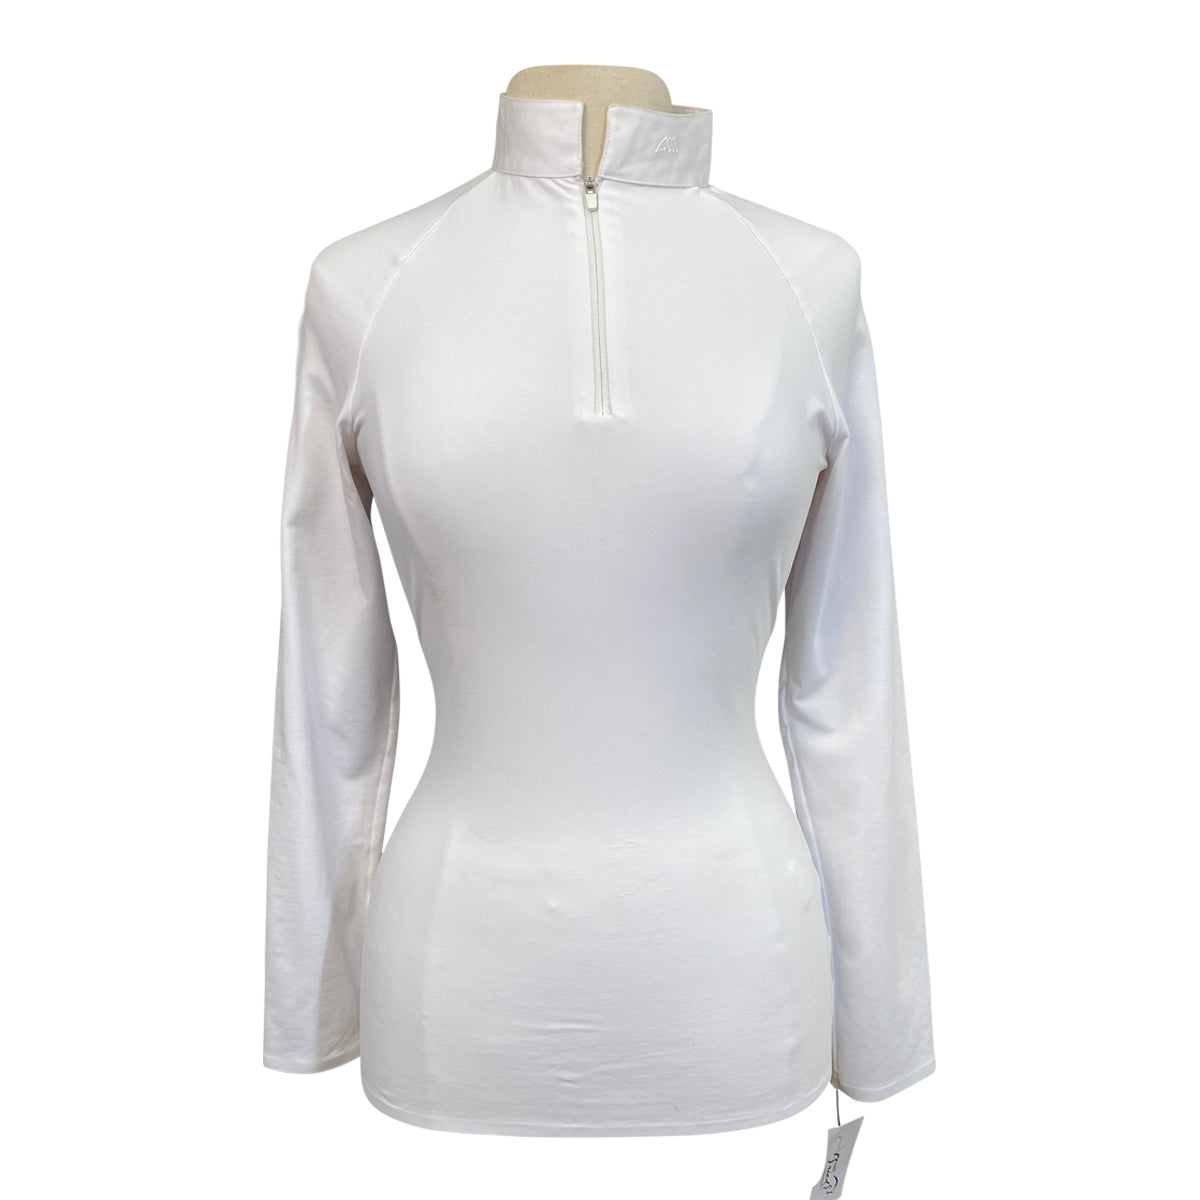 Equiline 'CamiraC' Competition Shirt in White